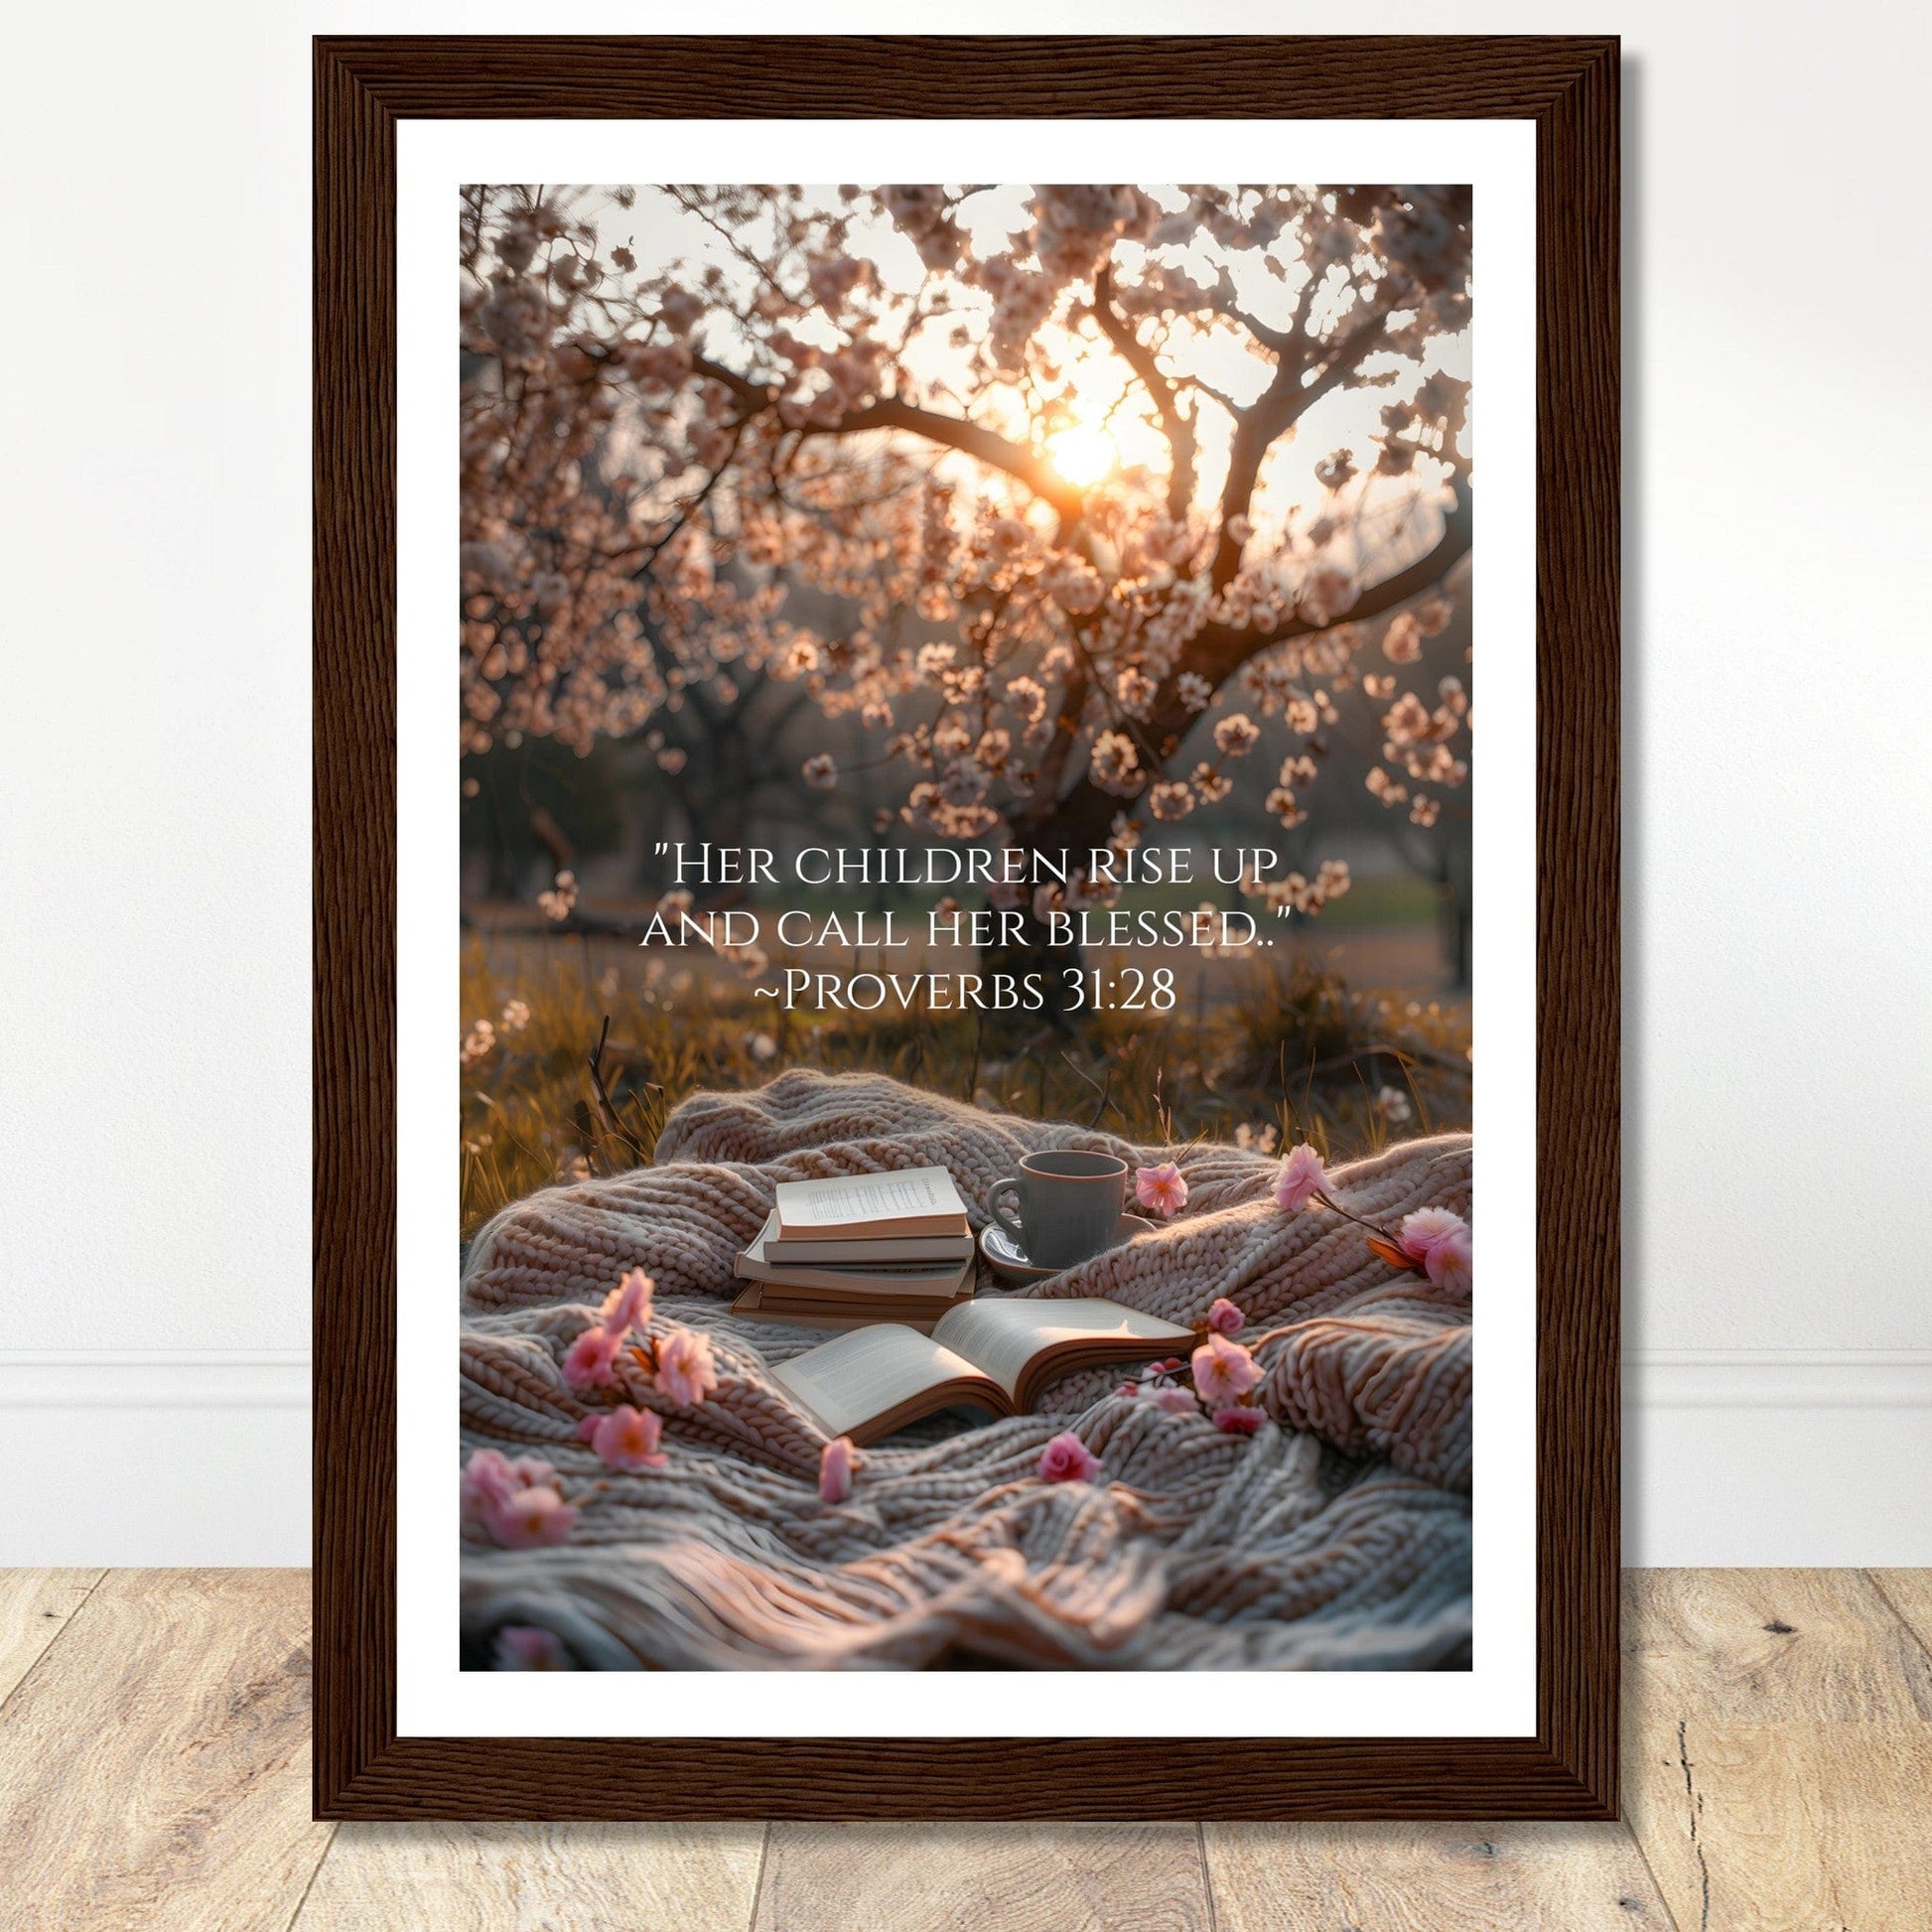 Coffee With My Father Print Material A4 21x29.7 cm / 8x12″ / Premium Matte Paper Wooden Framed Poster / Dark wood frame Framed Template